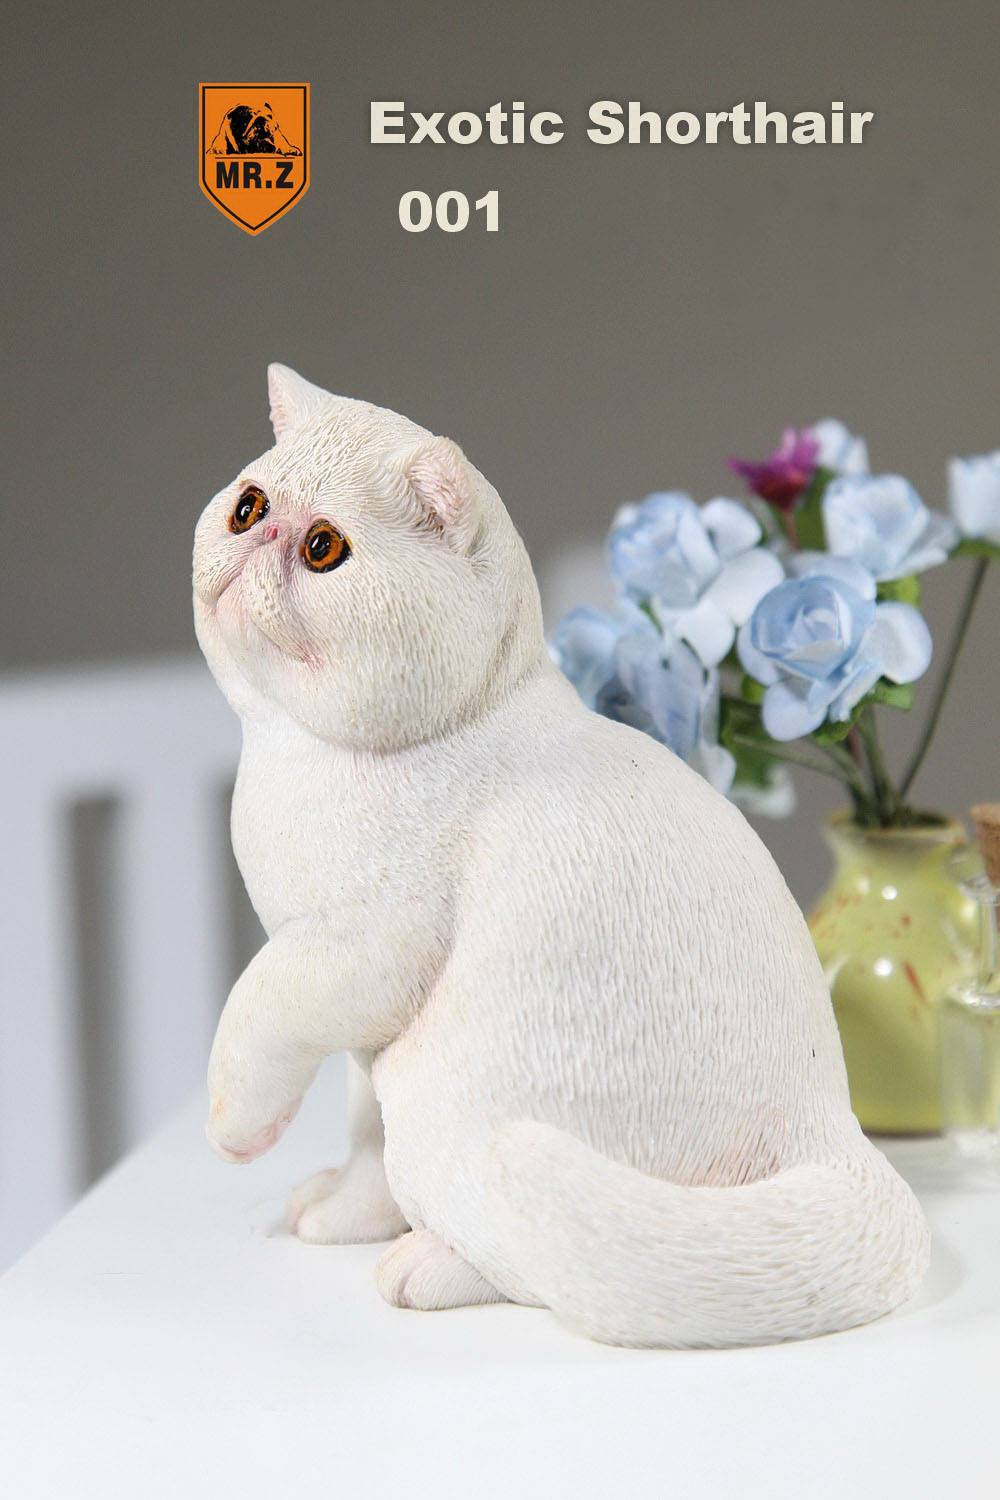 MR.Z - Real Animal Series No.8 - 1/6th Scale Exotic Shorthair Cat (Garfield) 001-005 - Marvelous Toys